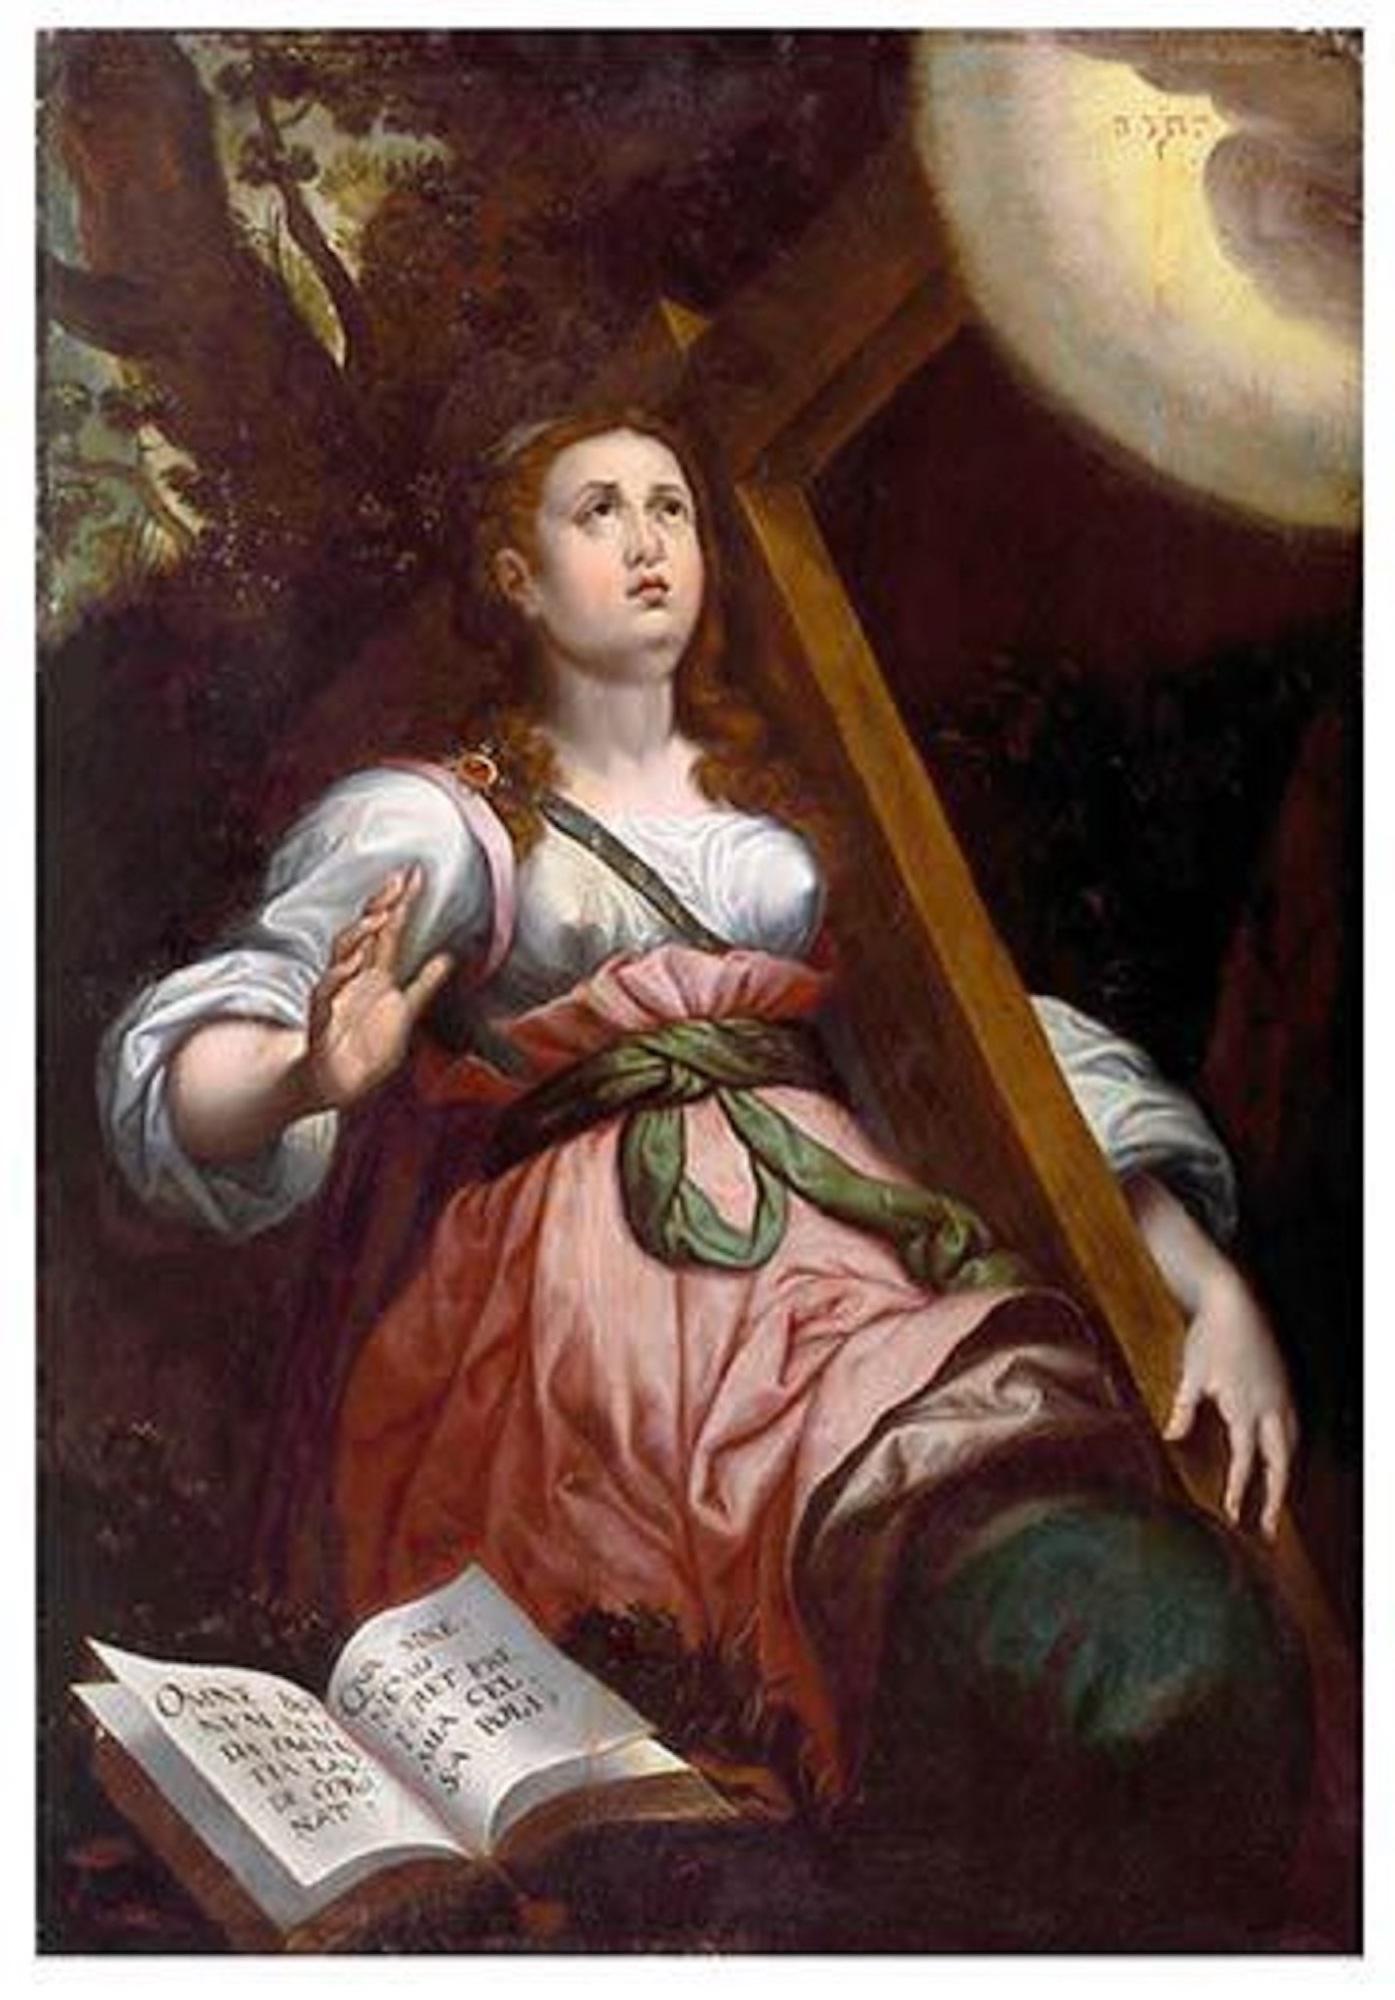 Unknown Figurative Painting - Saint Helena with the Cross - Oil on Canvas - Late 16th Century